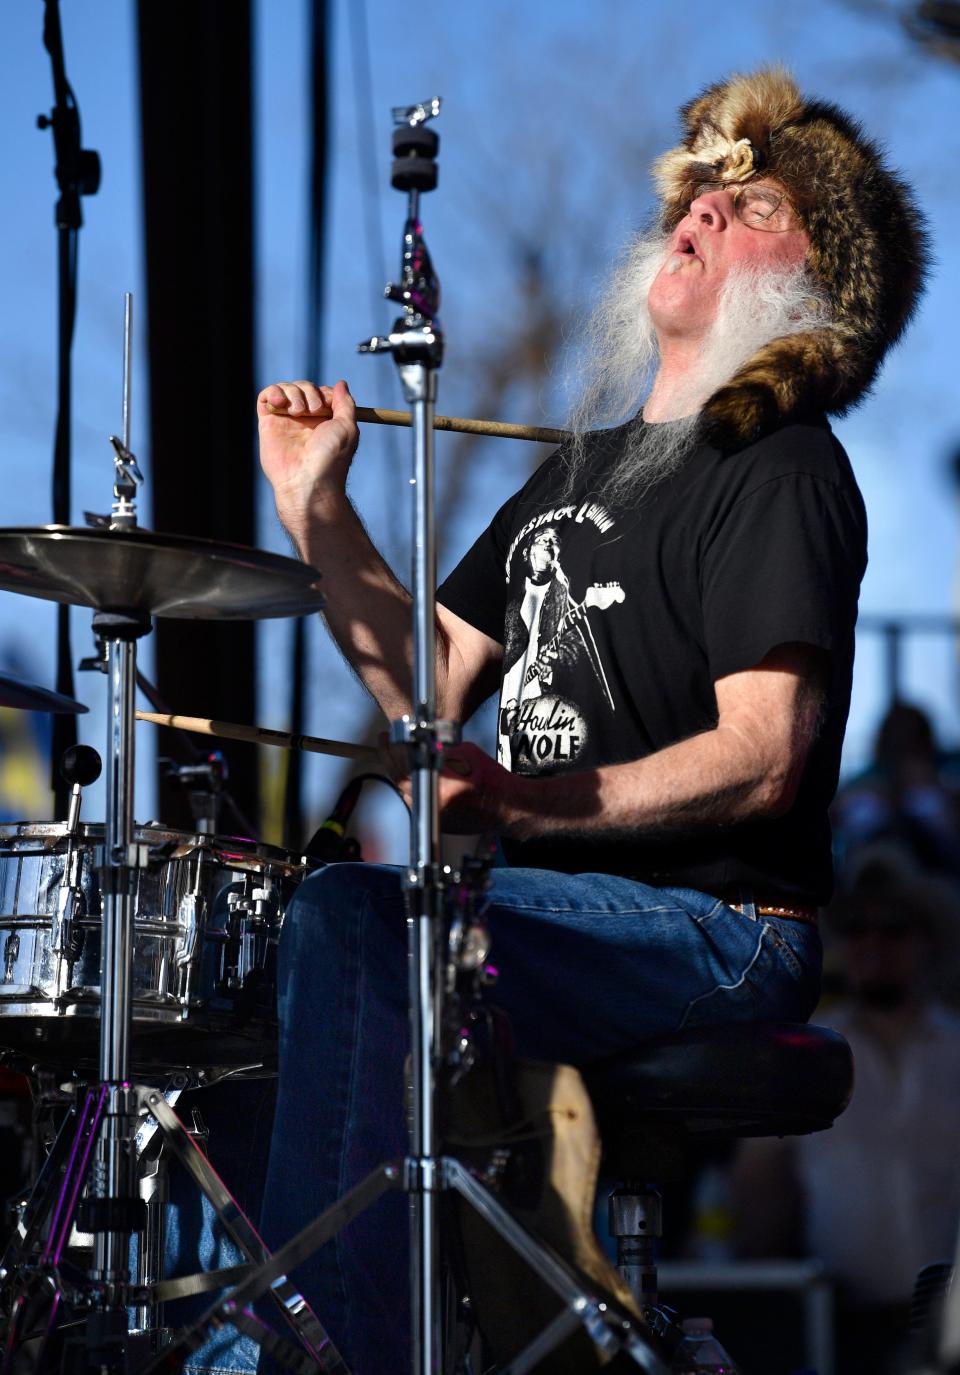 Kentucky Headhunters drummer Fred Young performs with the band during Friday's Outlaws & Legends Music Fest at the Back Porch of Texas in Abilene March 25, 2022.